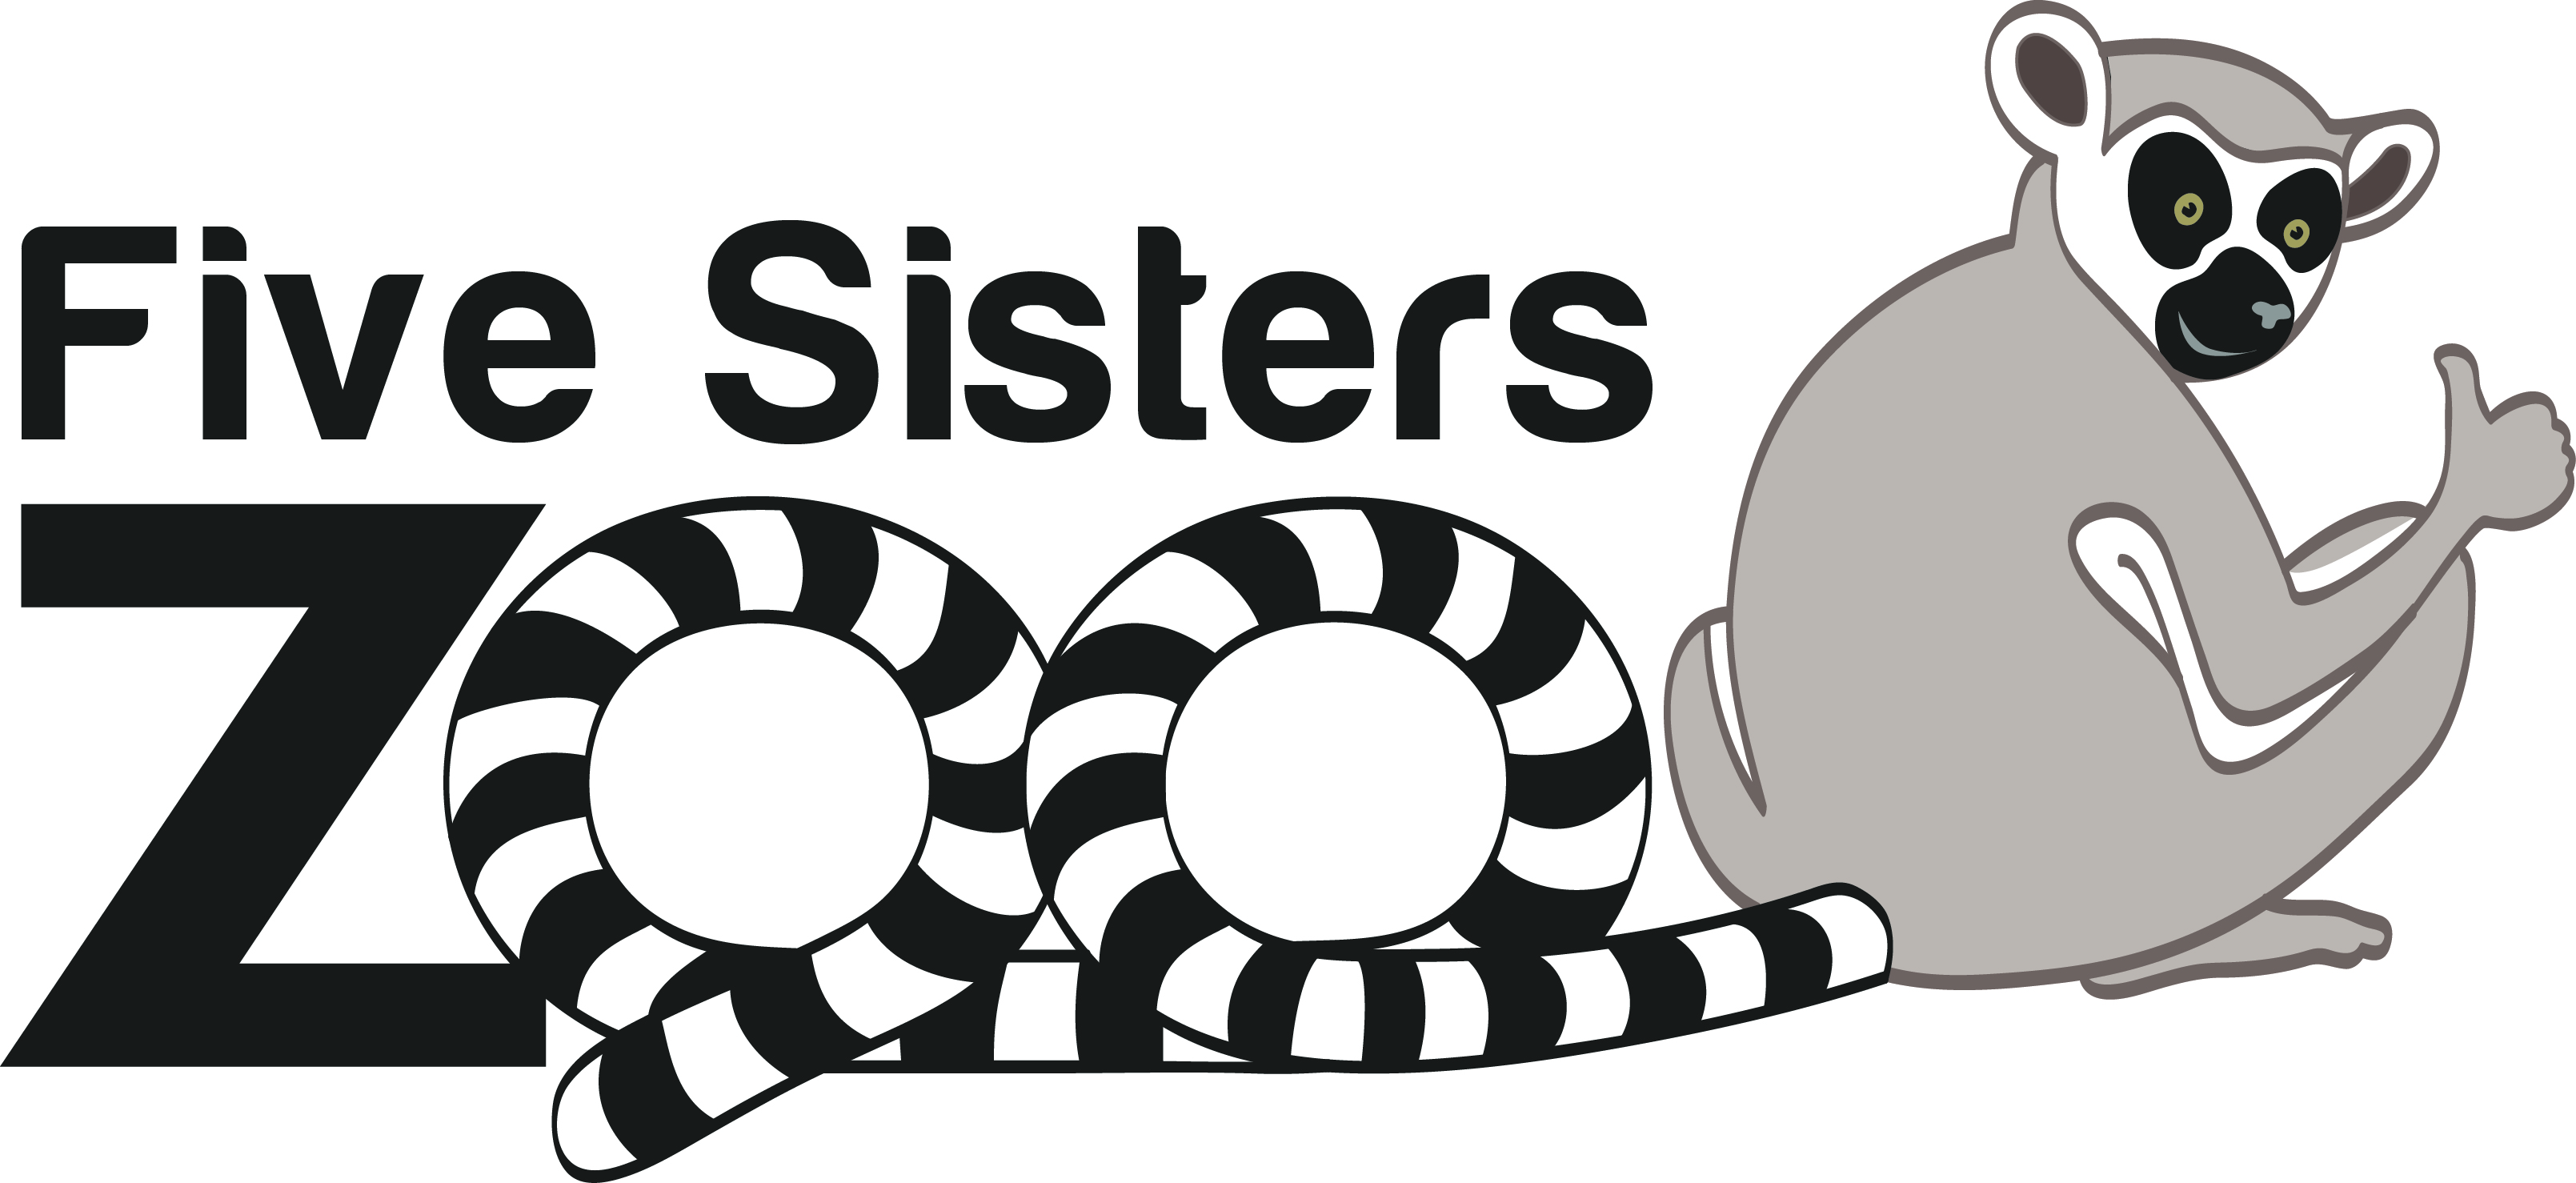 Five sisters. Zoo a5. Zookeeper logo. Pittsburgh Zoo logo. Is sister five